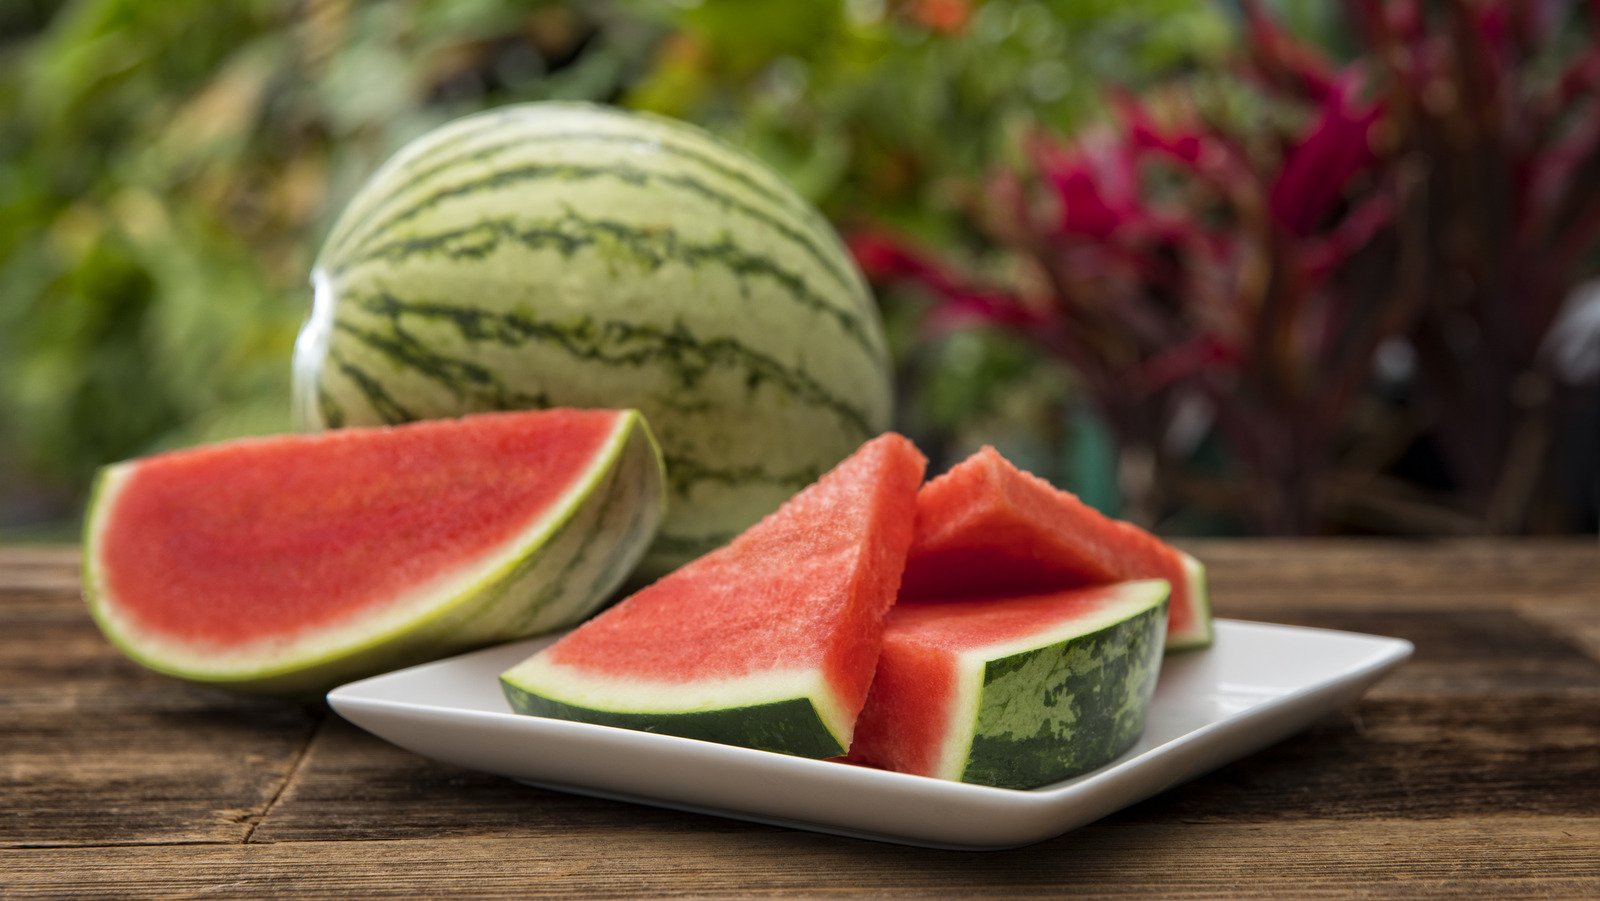 Pick Out Ripe Watermelon Every Time With This 2-Finger Trick